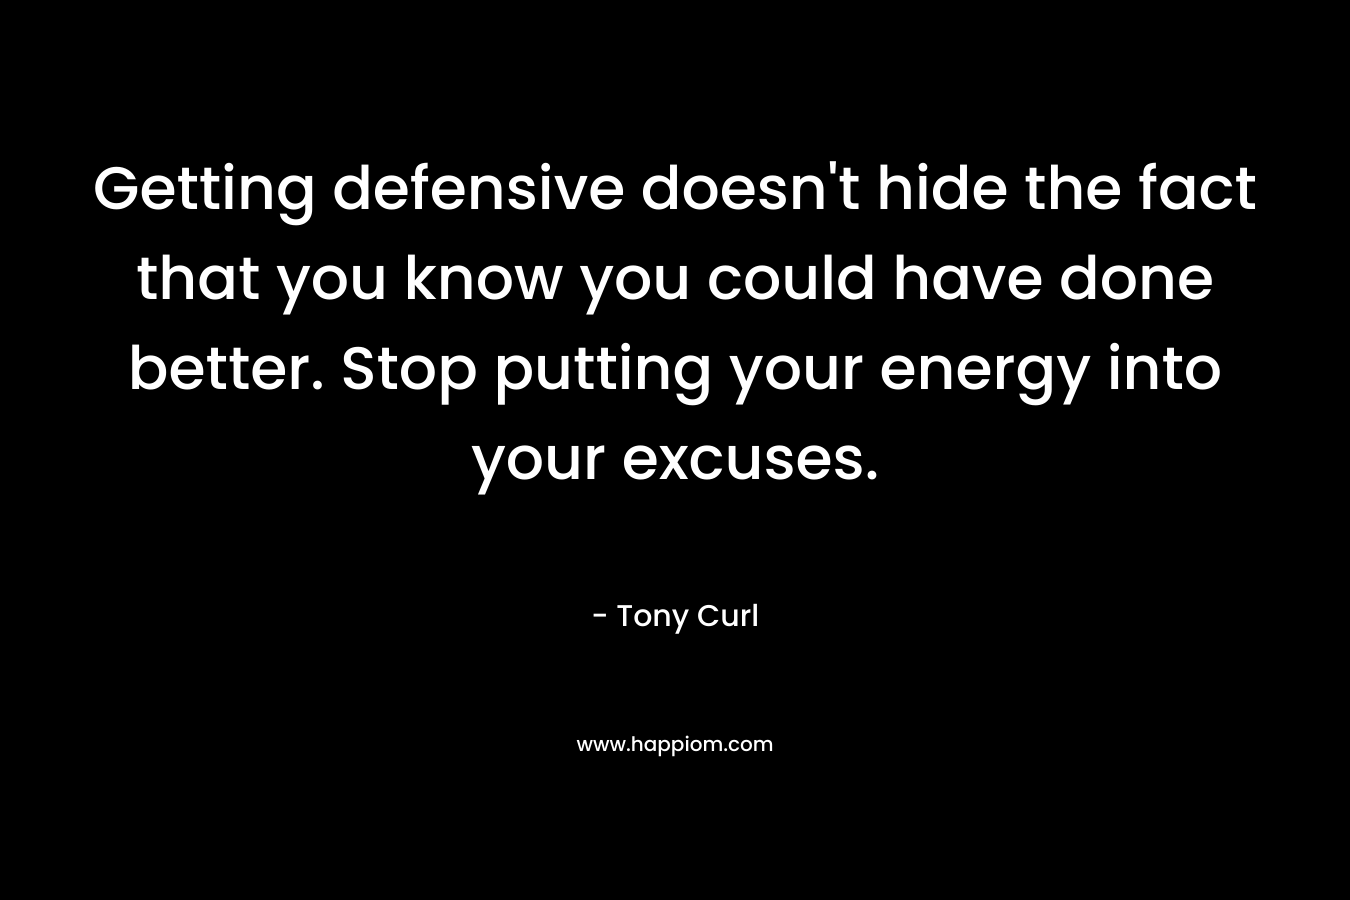 Getting defensive doesn’t hide the fact that you know you could have done better. Stop putting your energy into your excuses. – Tony Curl